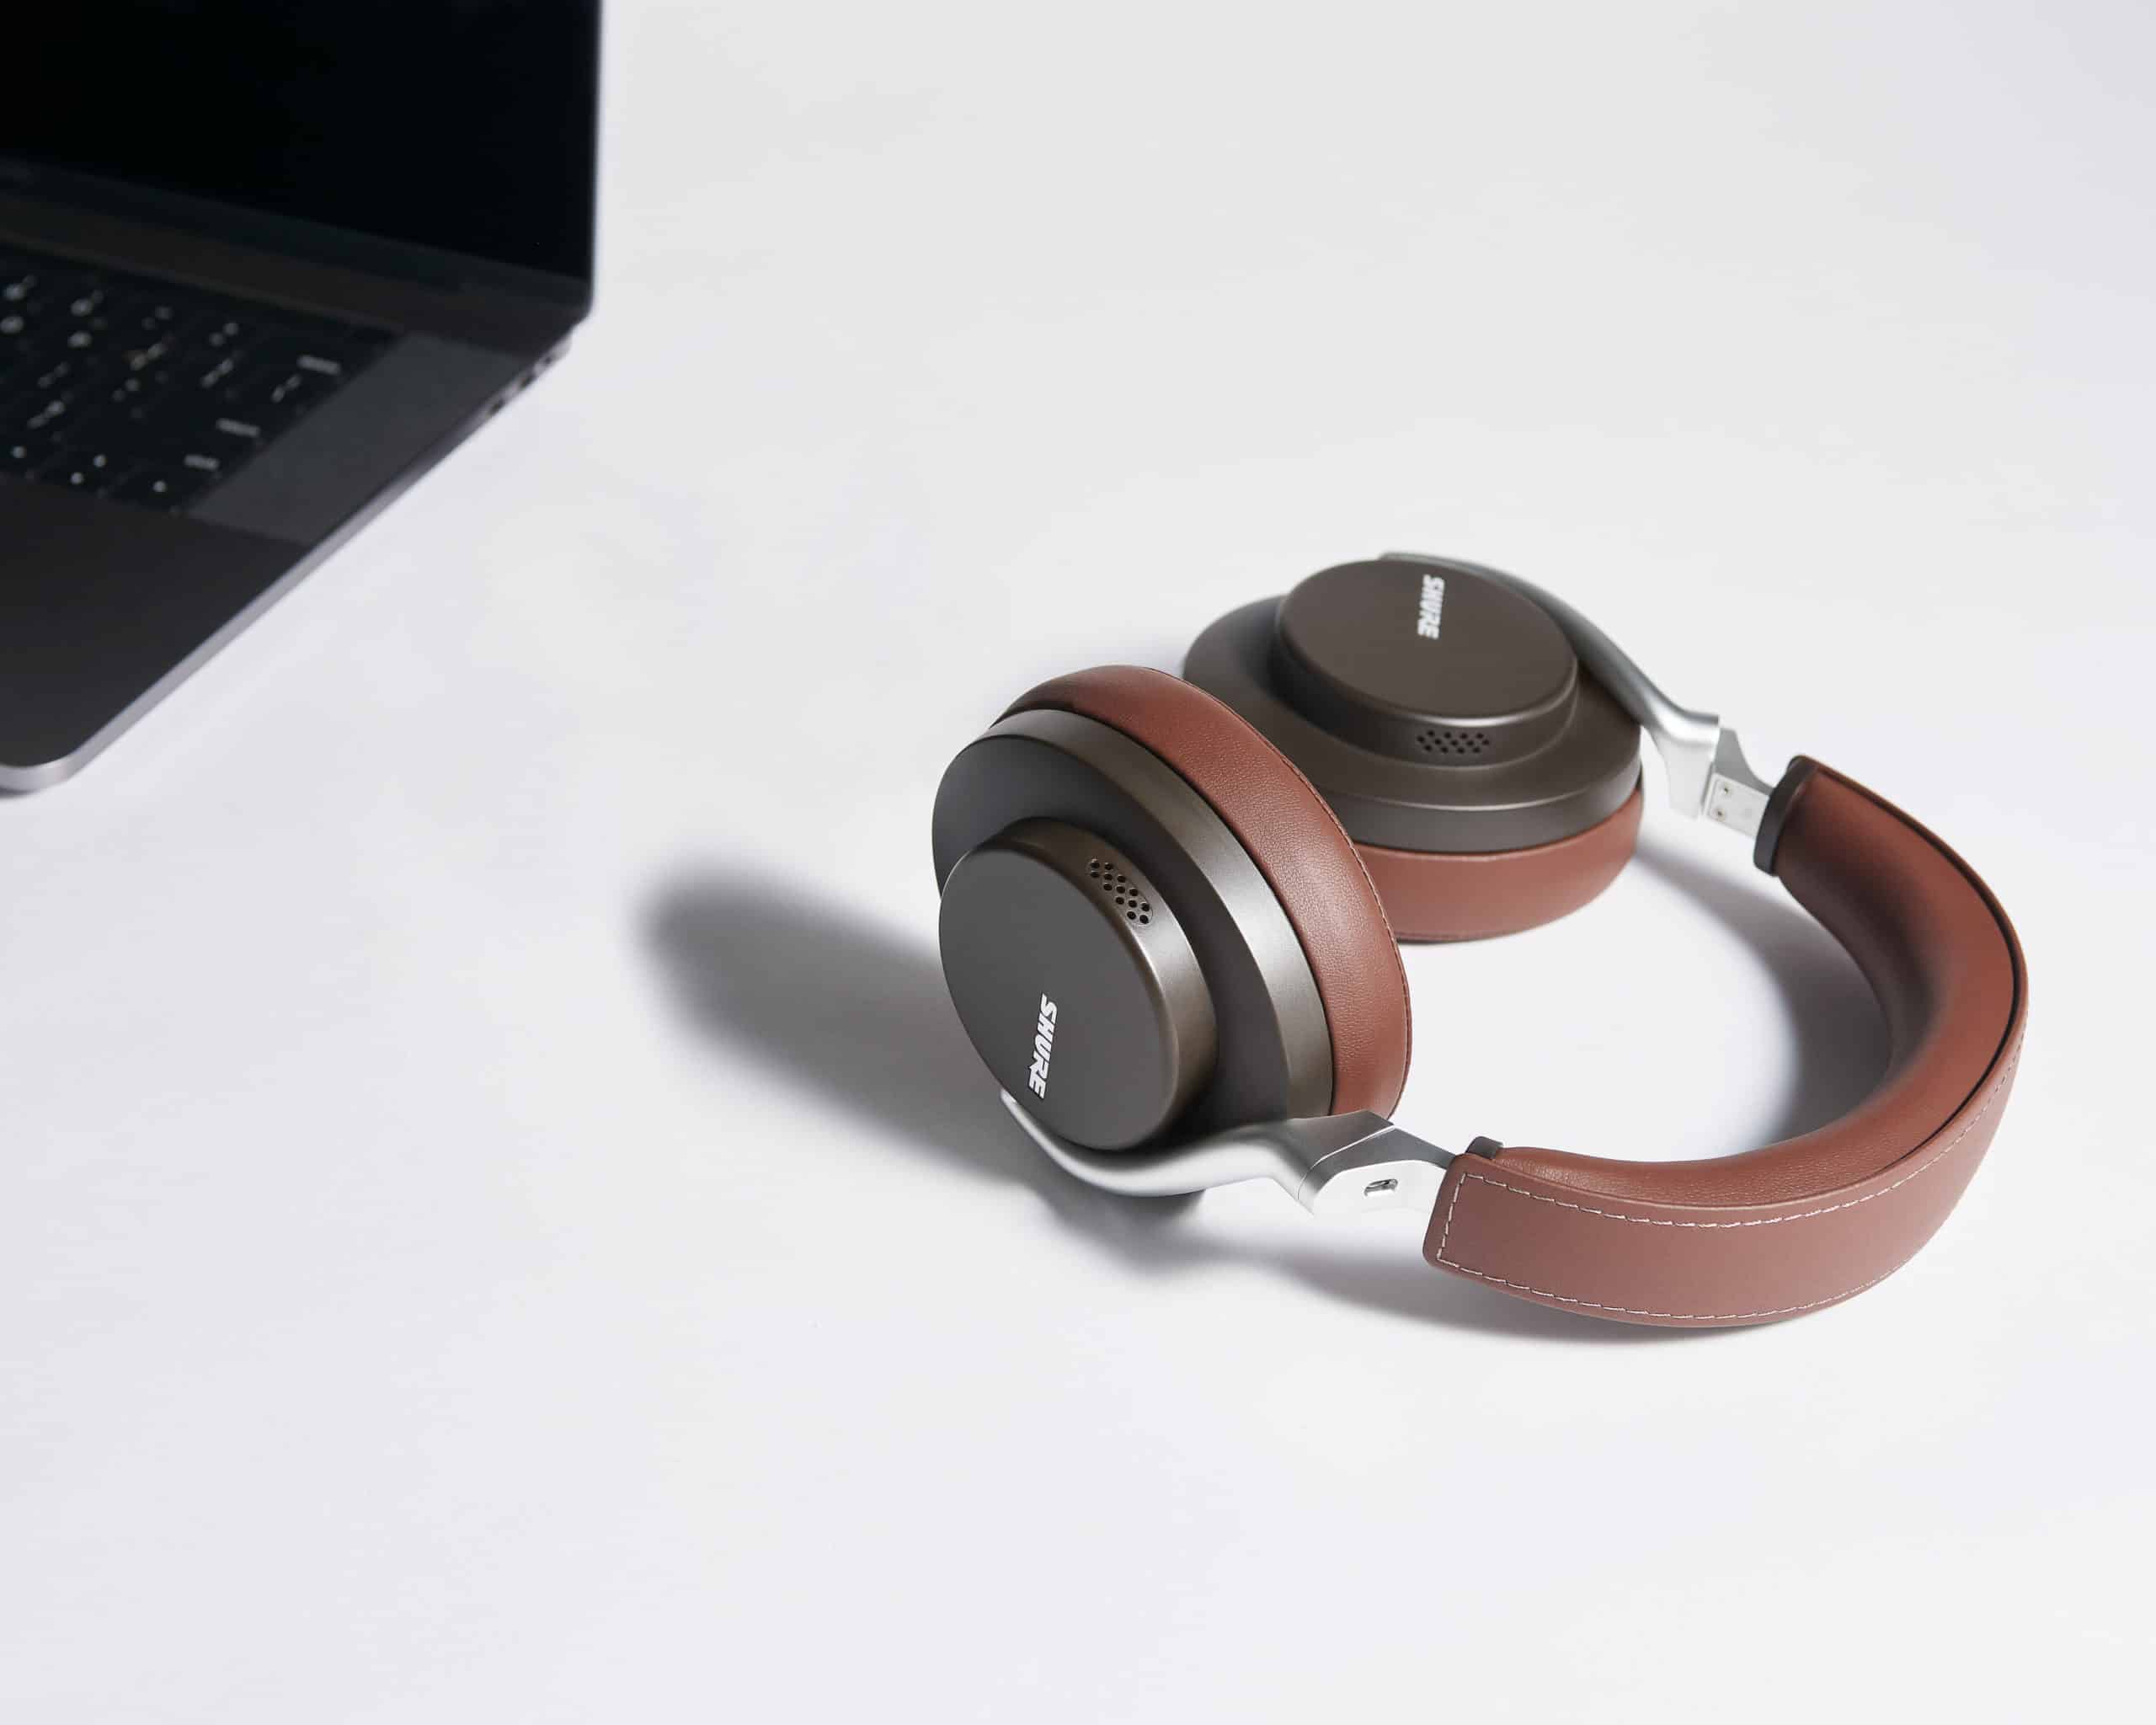 Shure debuts their new Aonic headphones with noise cancellation, in the UAE